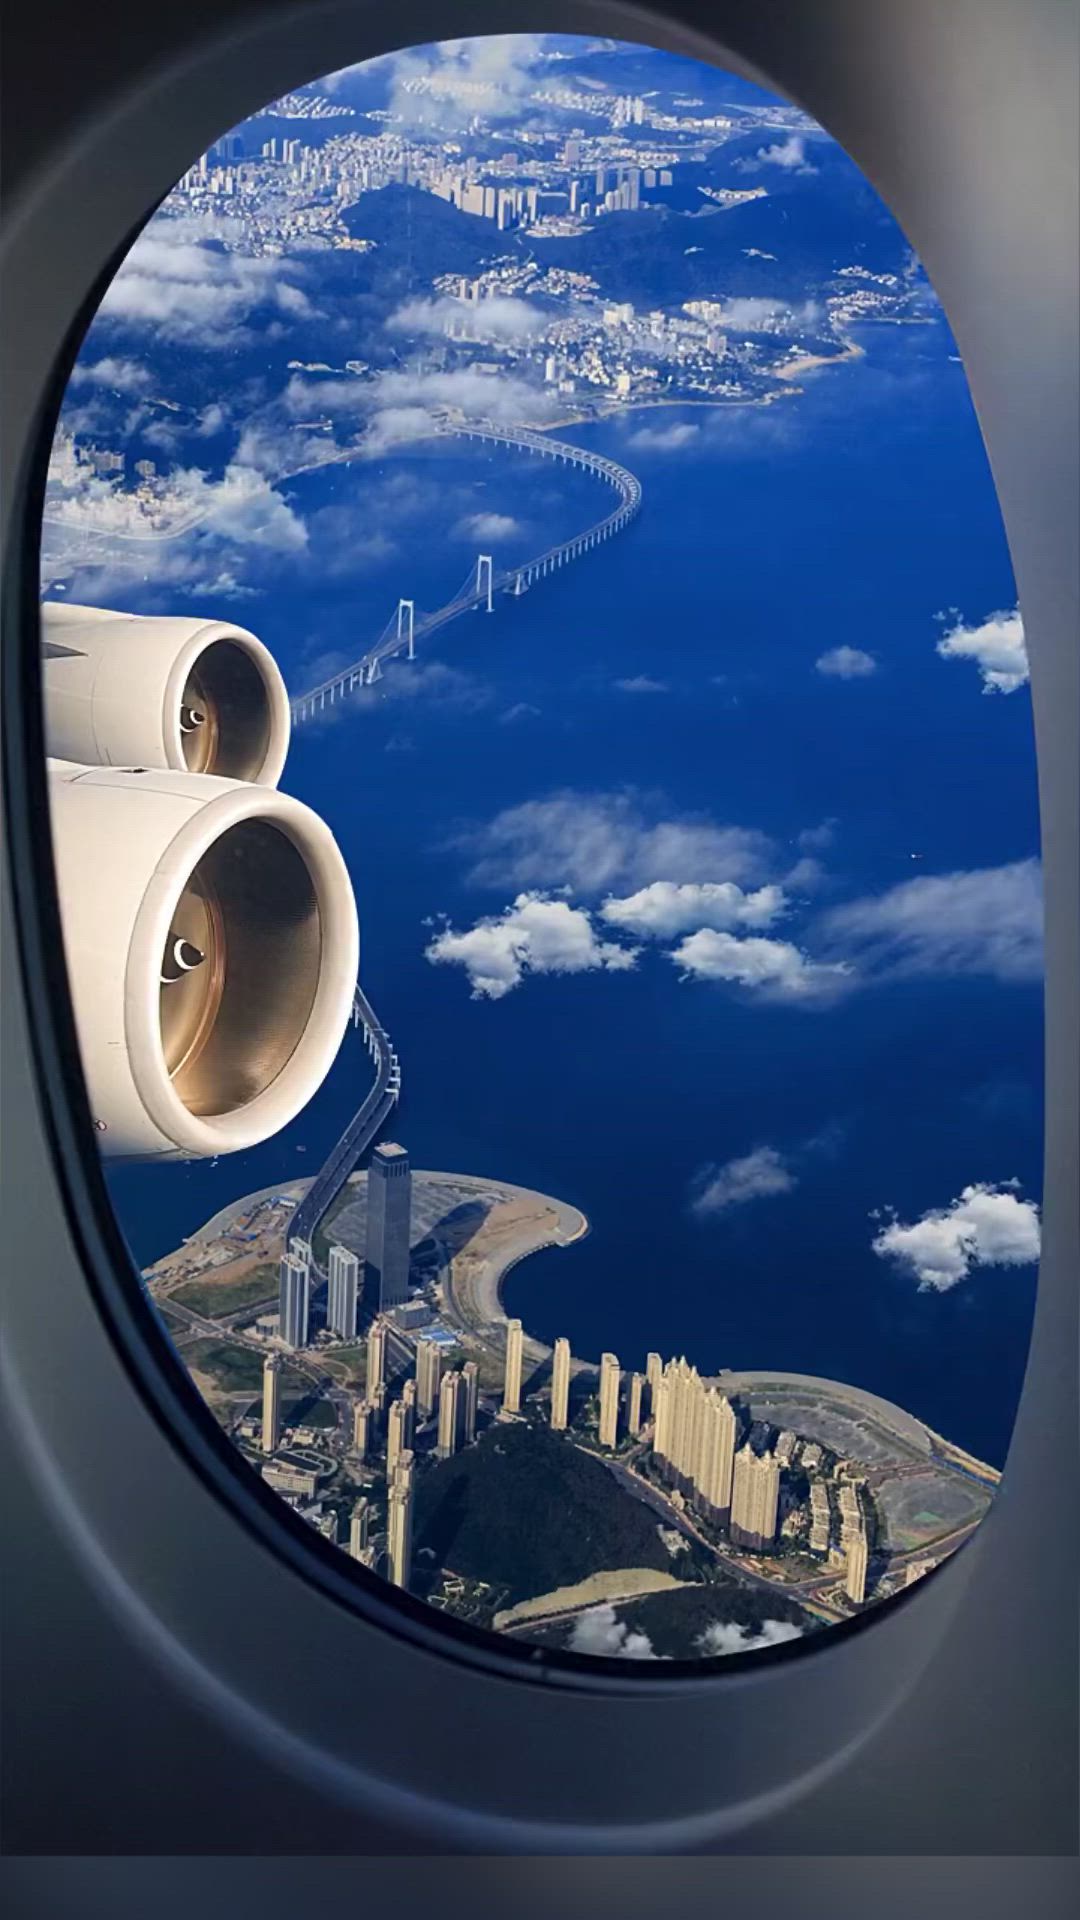 This may contain: an airplane window looking out at the city below